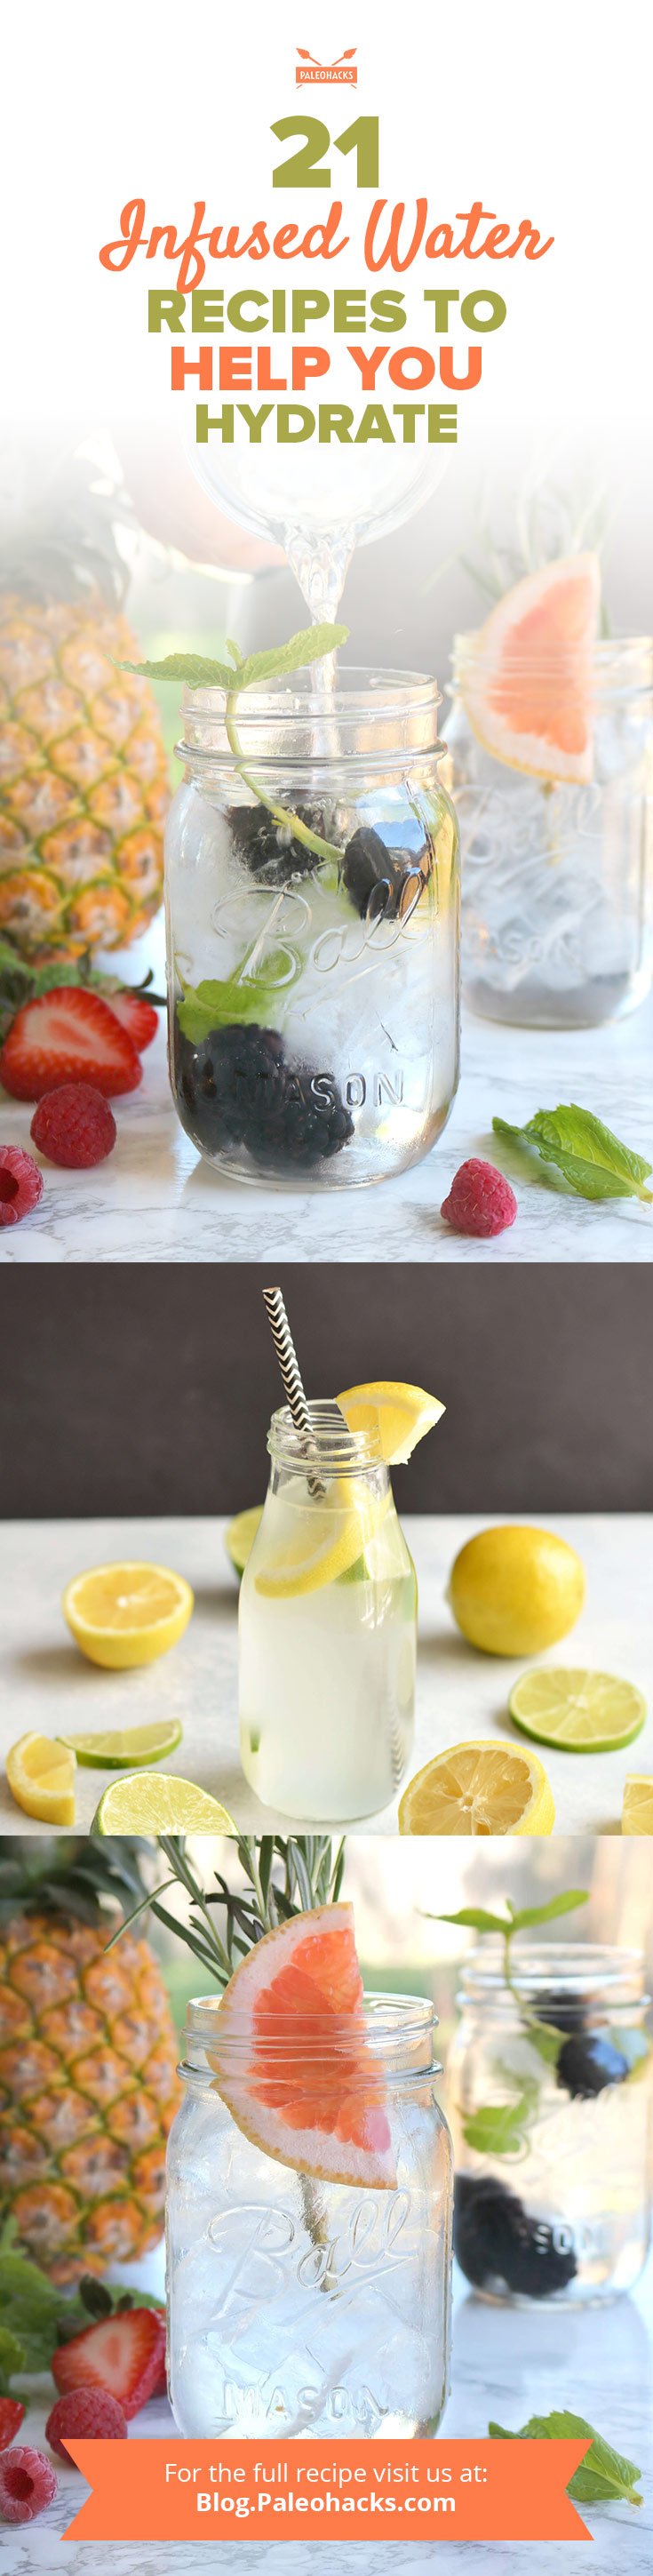 Mixed with fruits, veggies, herbs, and even flowers, these infused water recipes make getting your daily hydration a breeze!